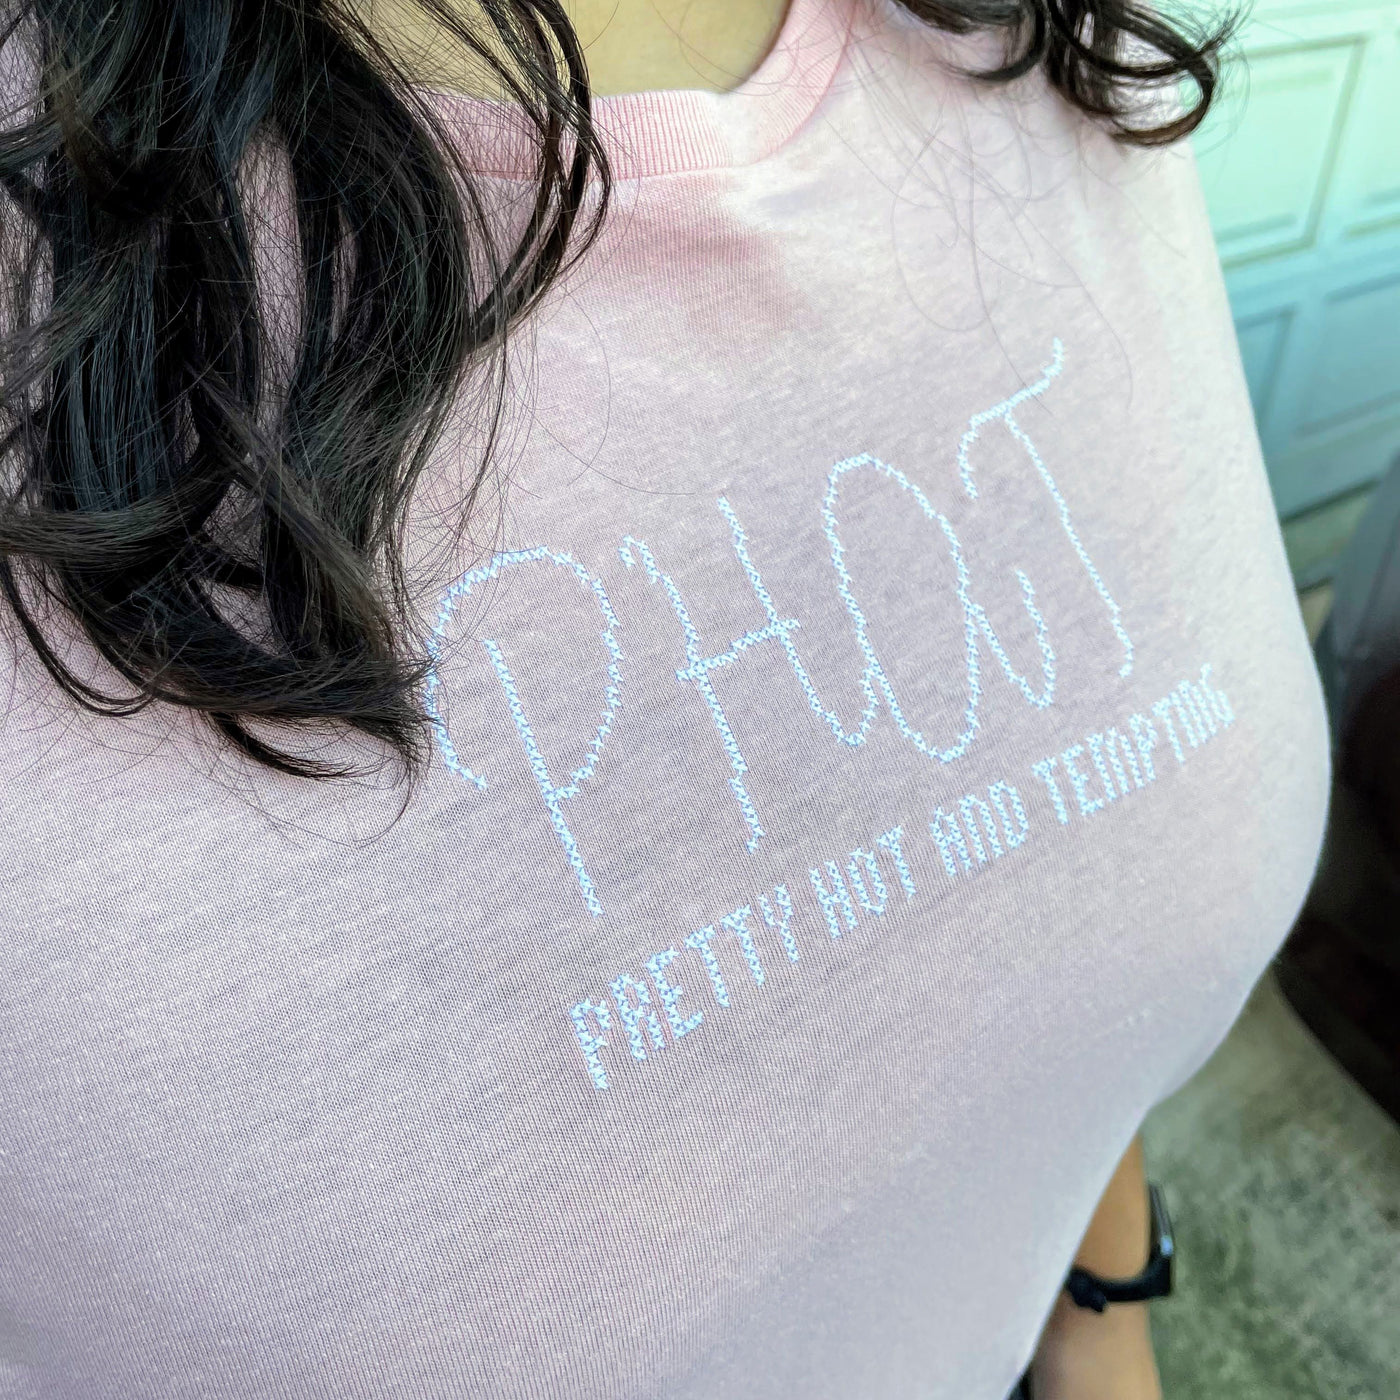 P.H.A.T. T-Shirt (100% of Proceeds Donated)